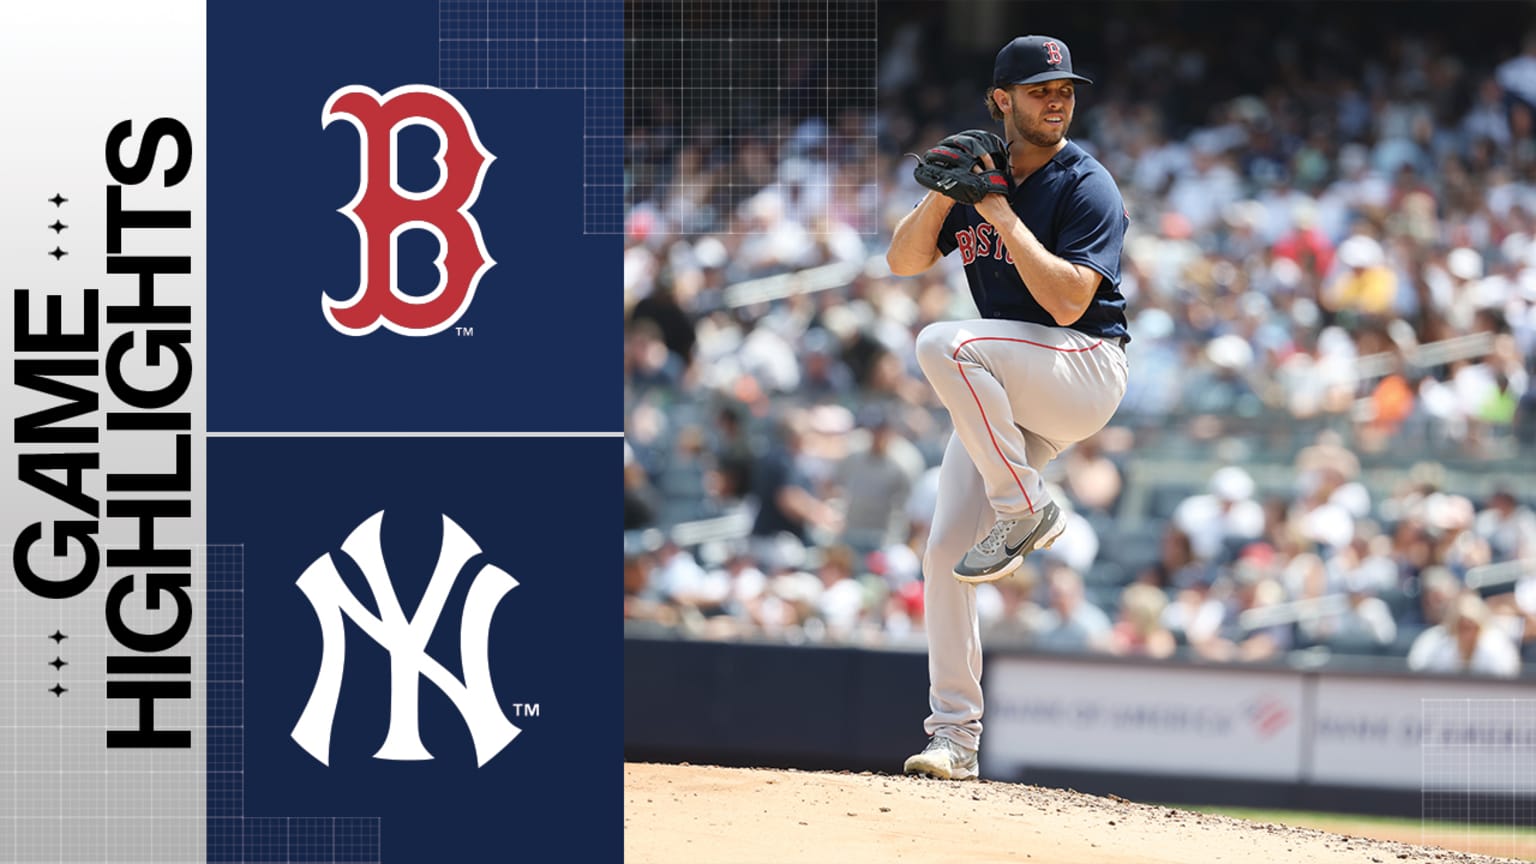 MLB ratings: Red Sox-Yankees games lower - Sports Media Watch